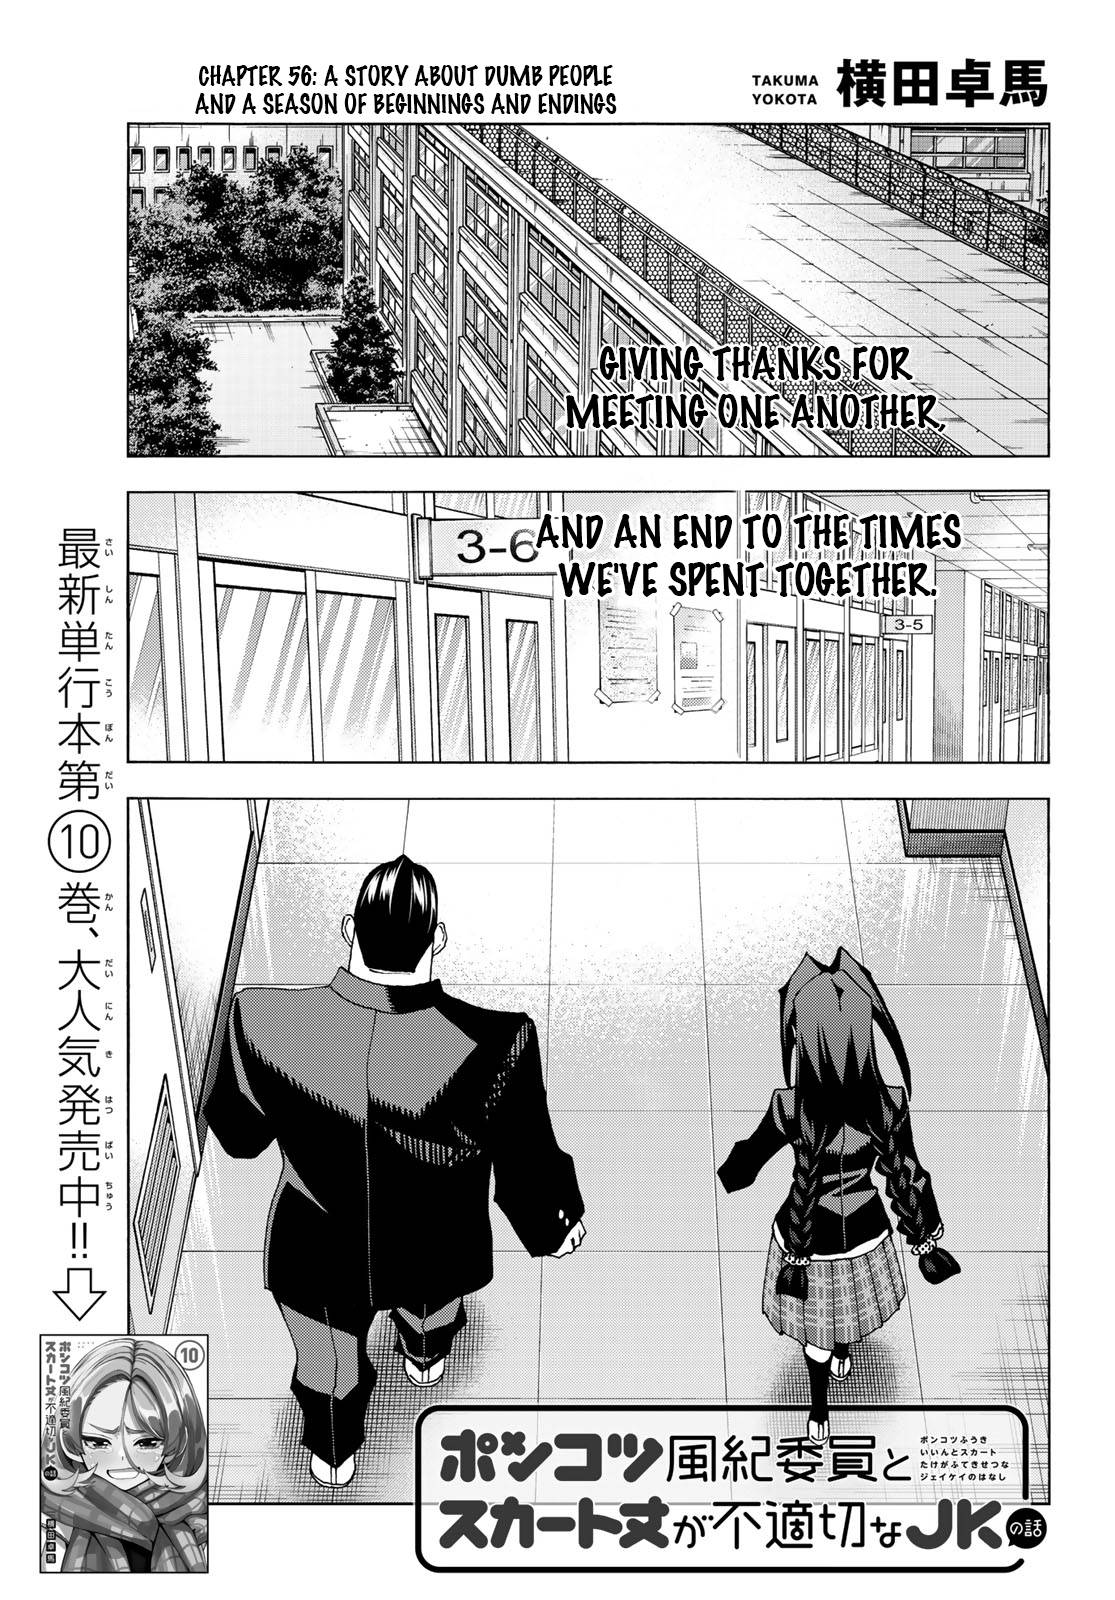 Classroom of the Elite, Chapter 64 - Classroom of the Elite Manga Online